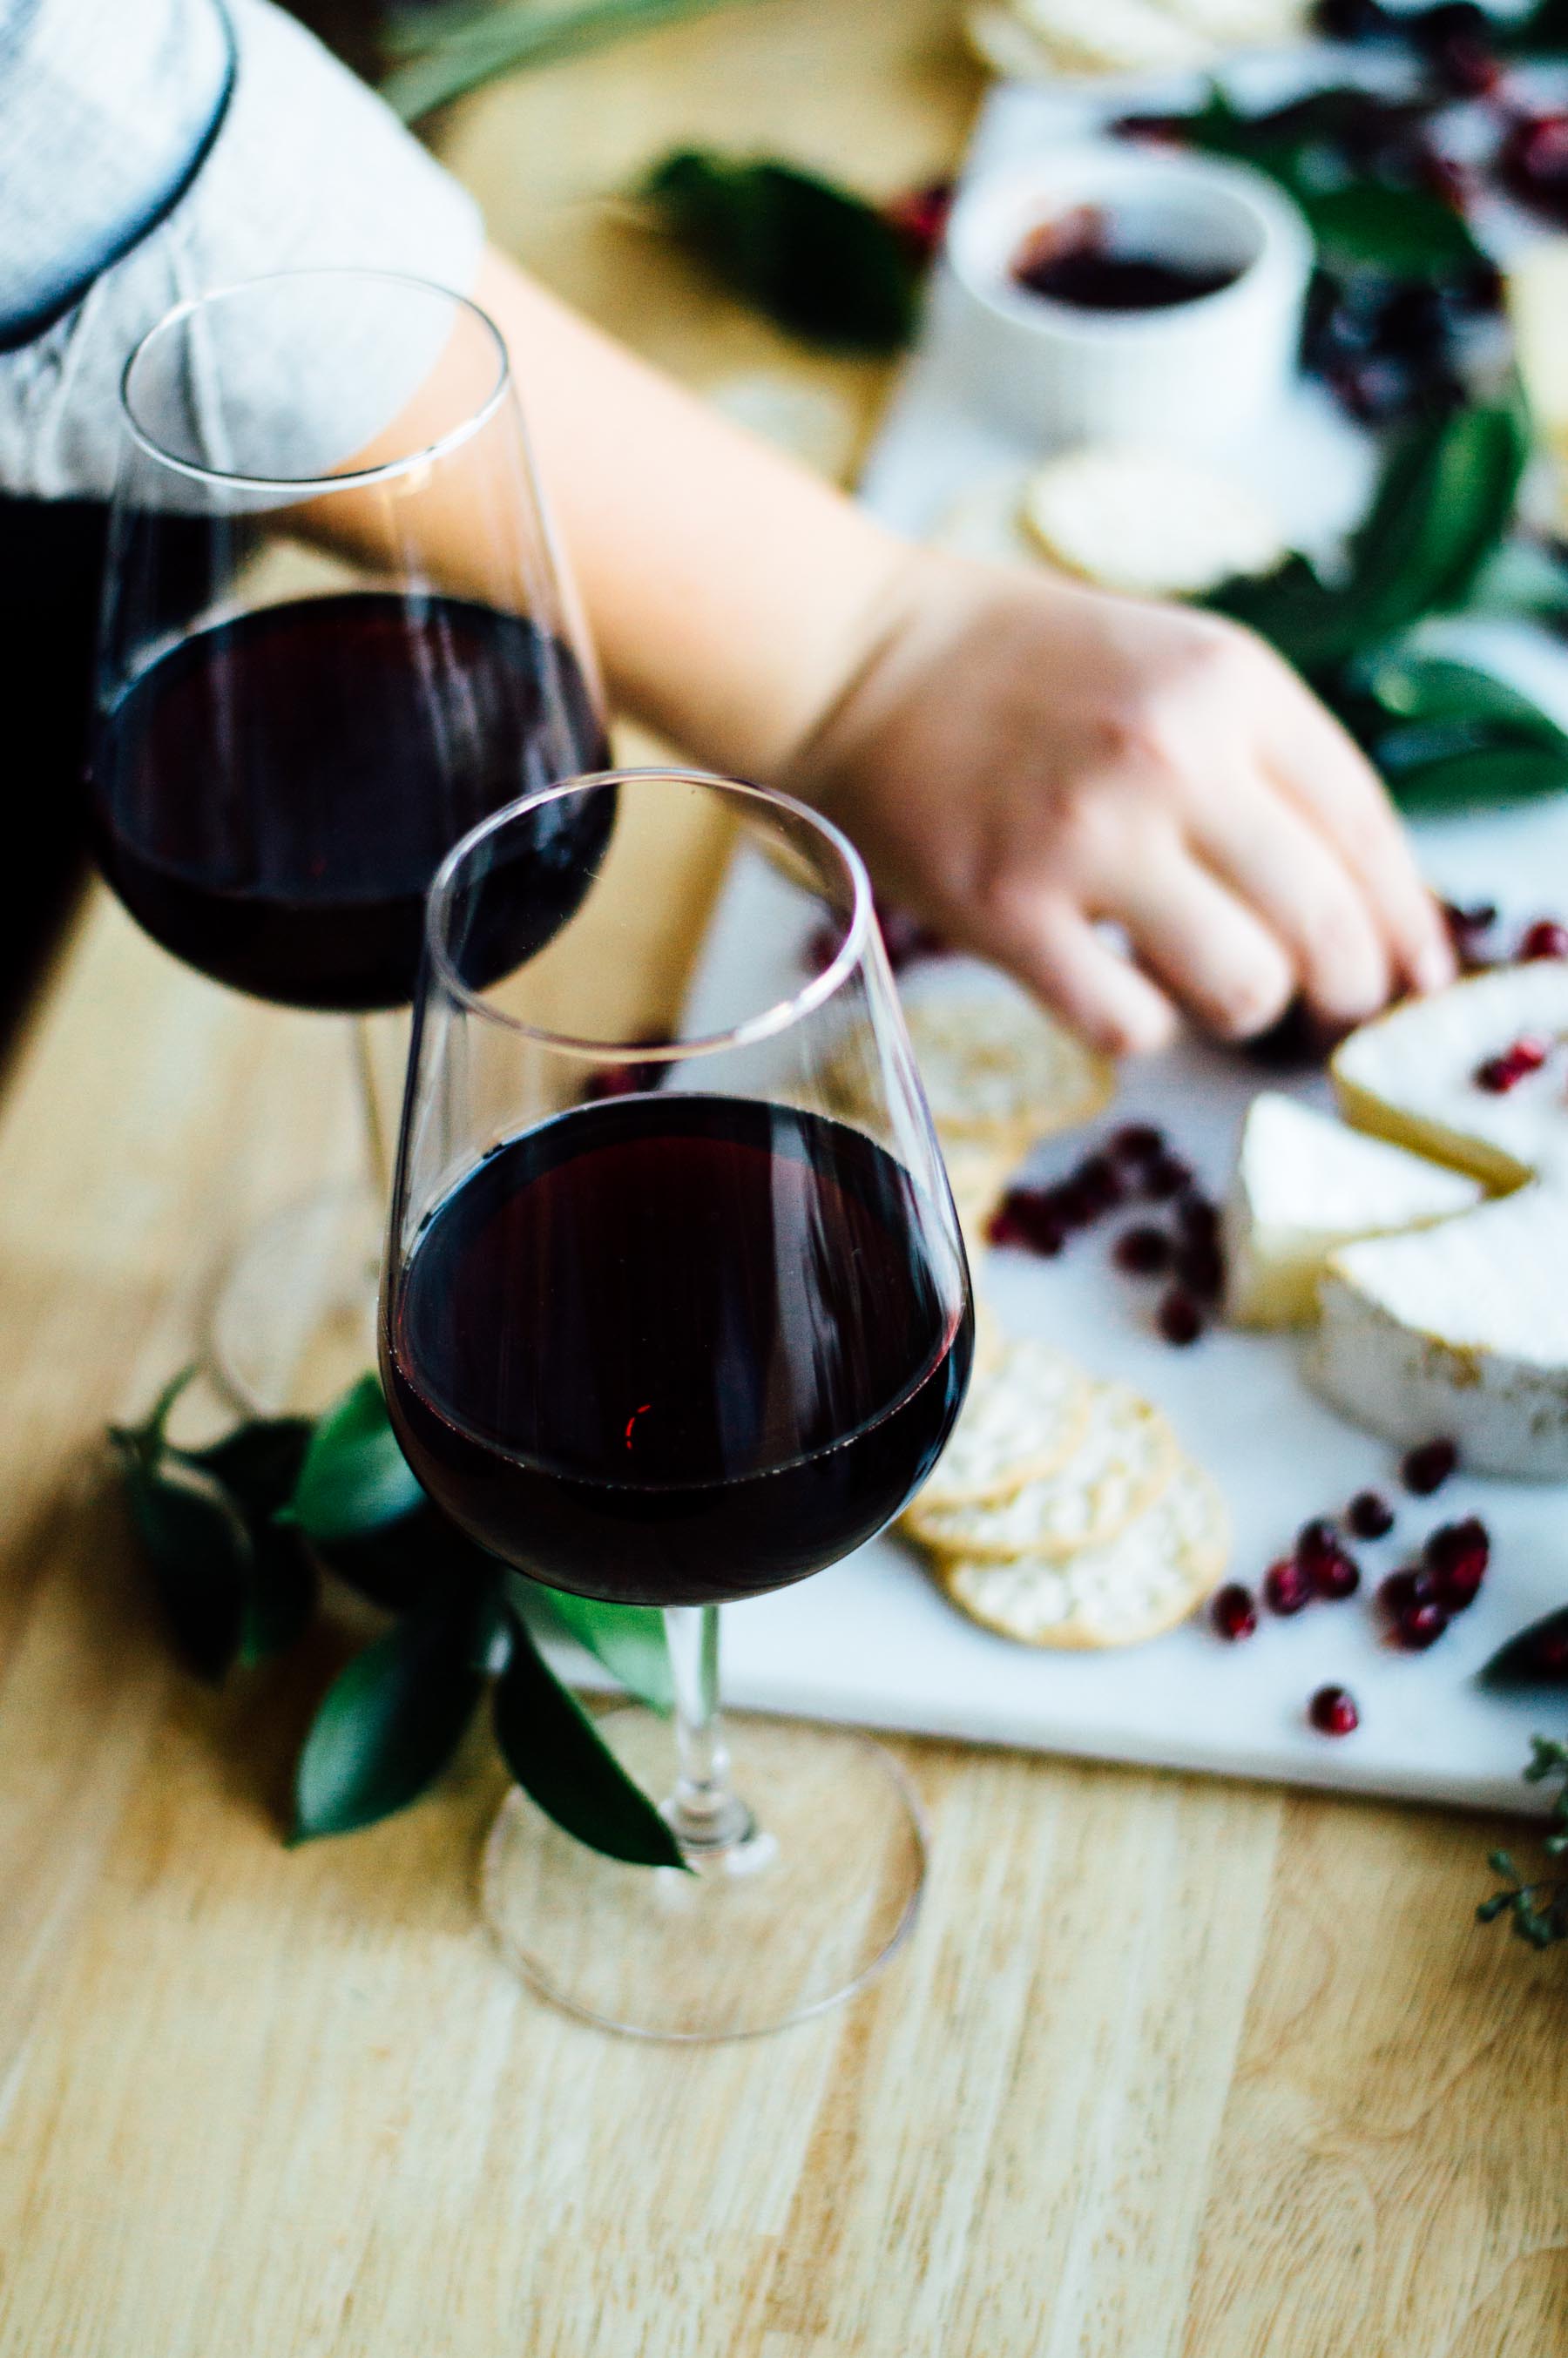 Holiday party prep tip: Select one wine to feature, then offer spiced garnishes for a make-your-own winter sangria bar! | bygabriella.co